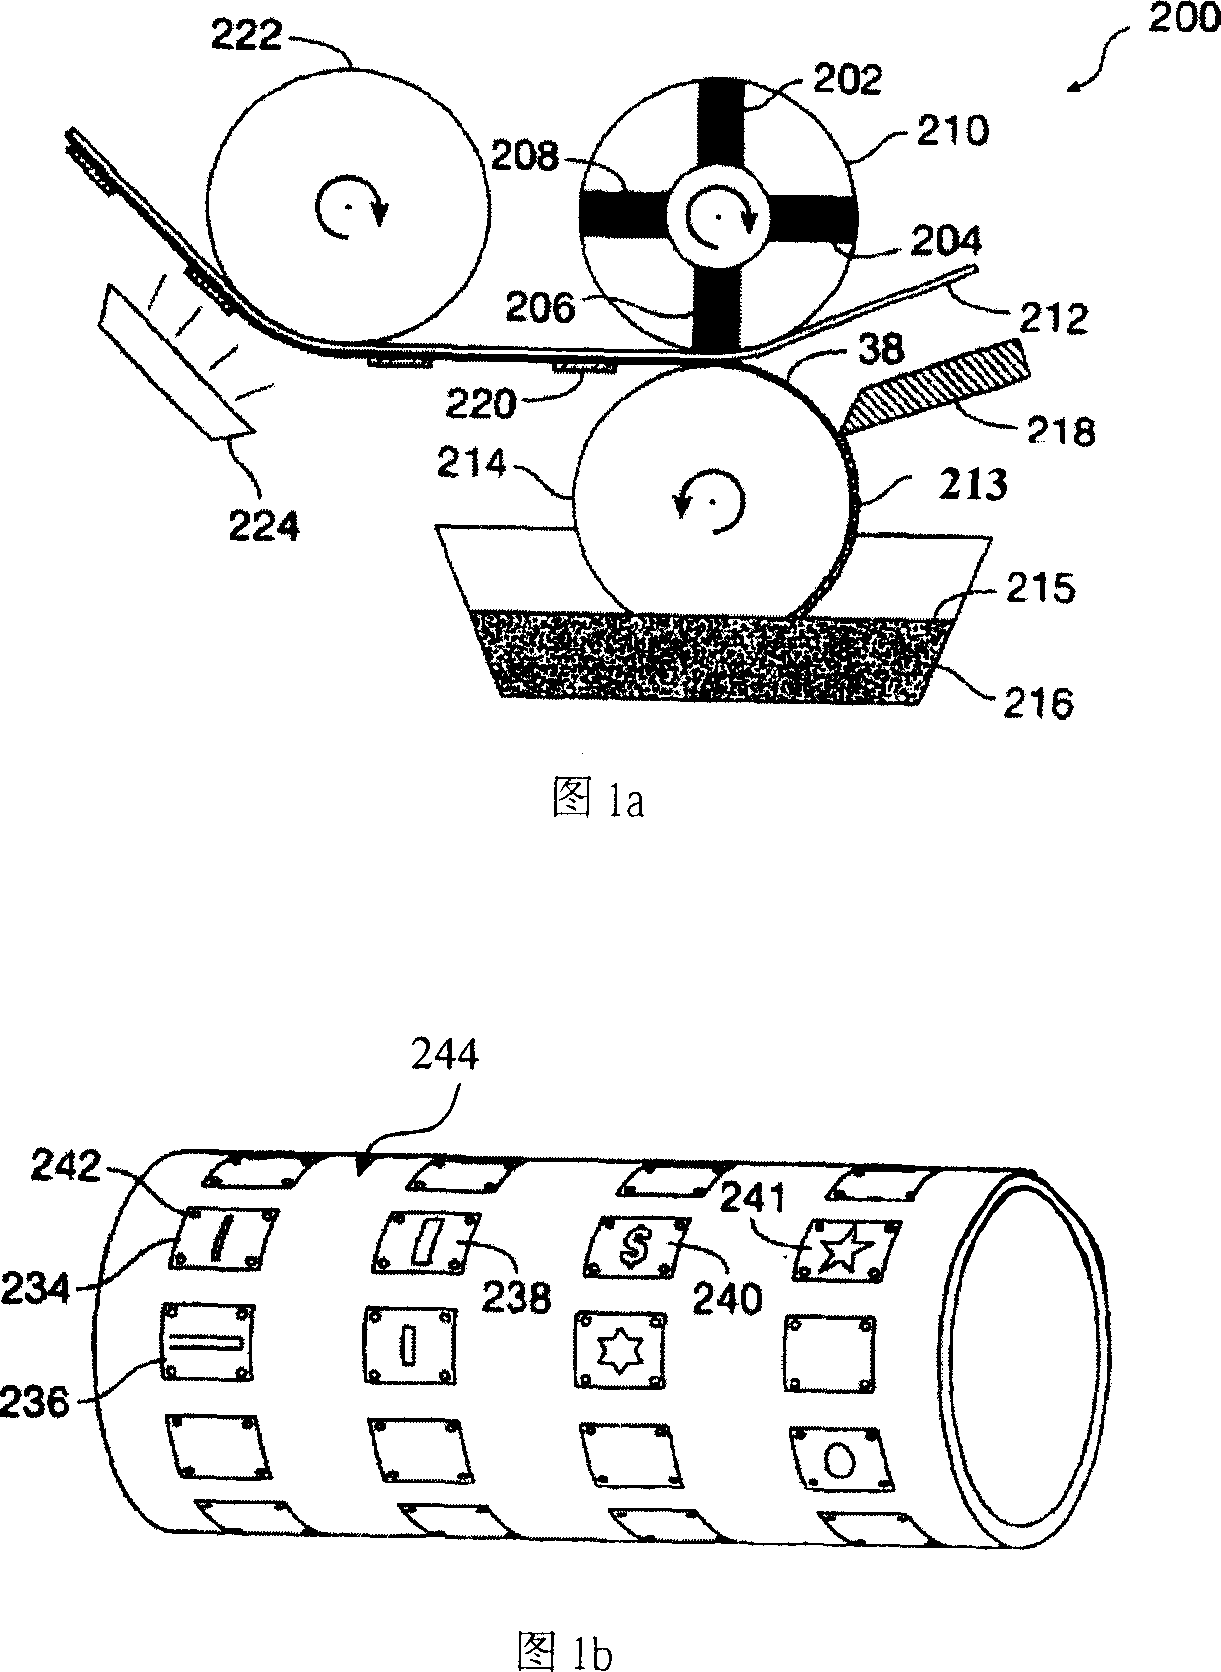 Apparatus for orienting magnetic flakes